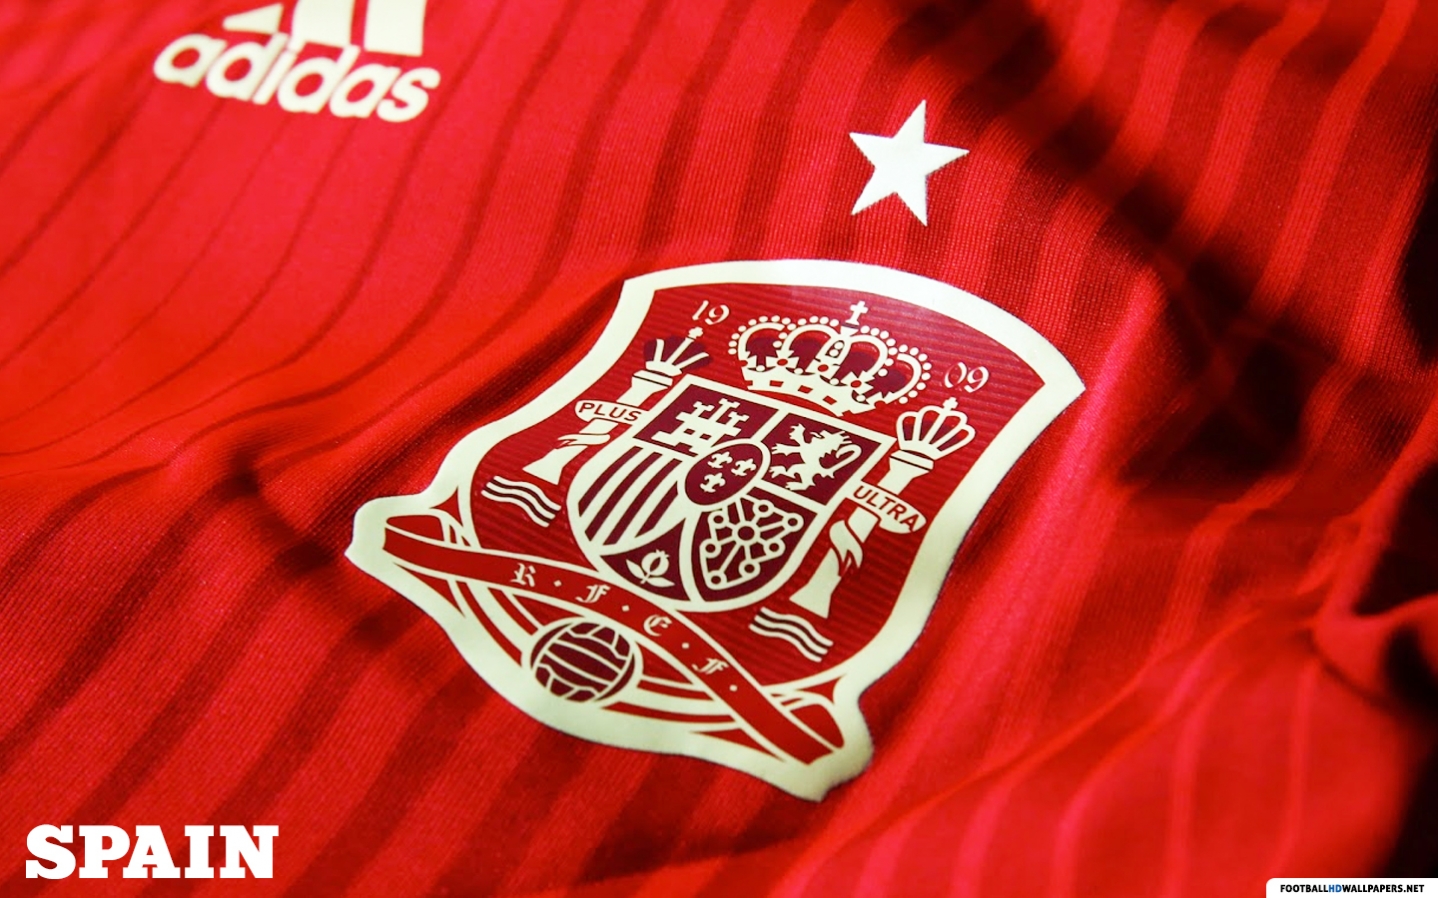 Spain national team jersy and logo hd wallpapers 1080p hd